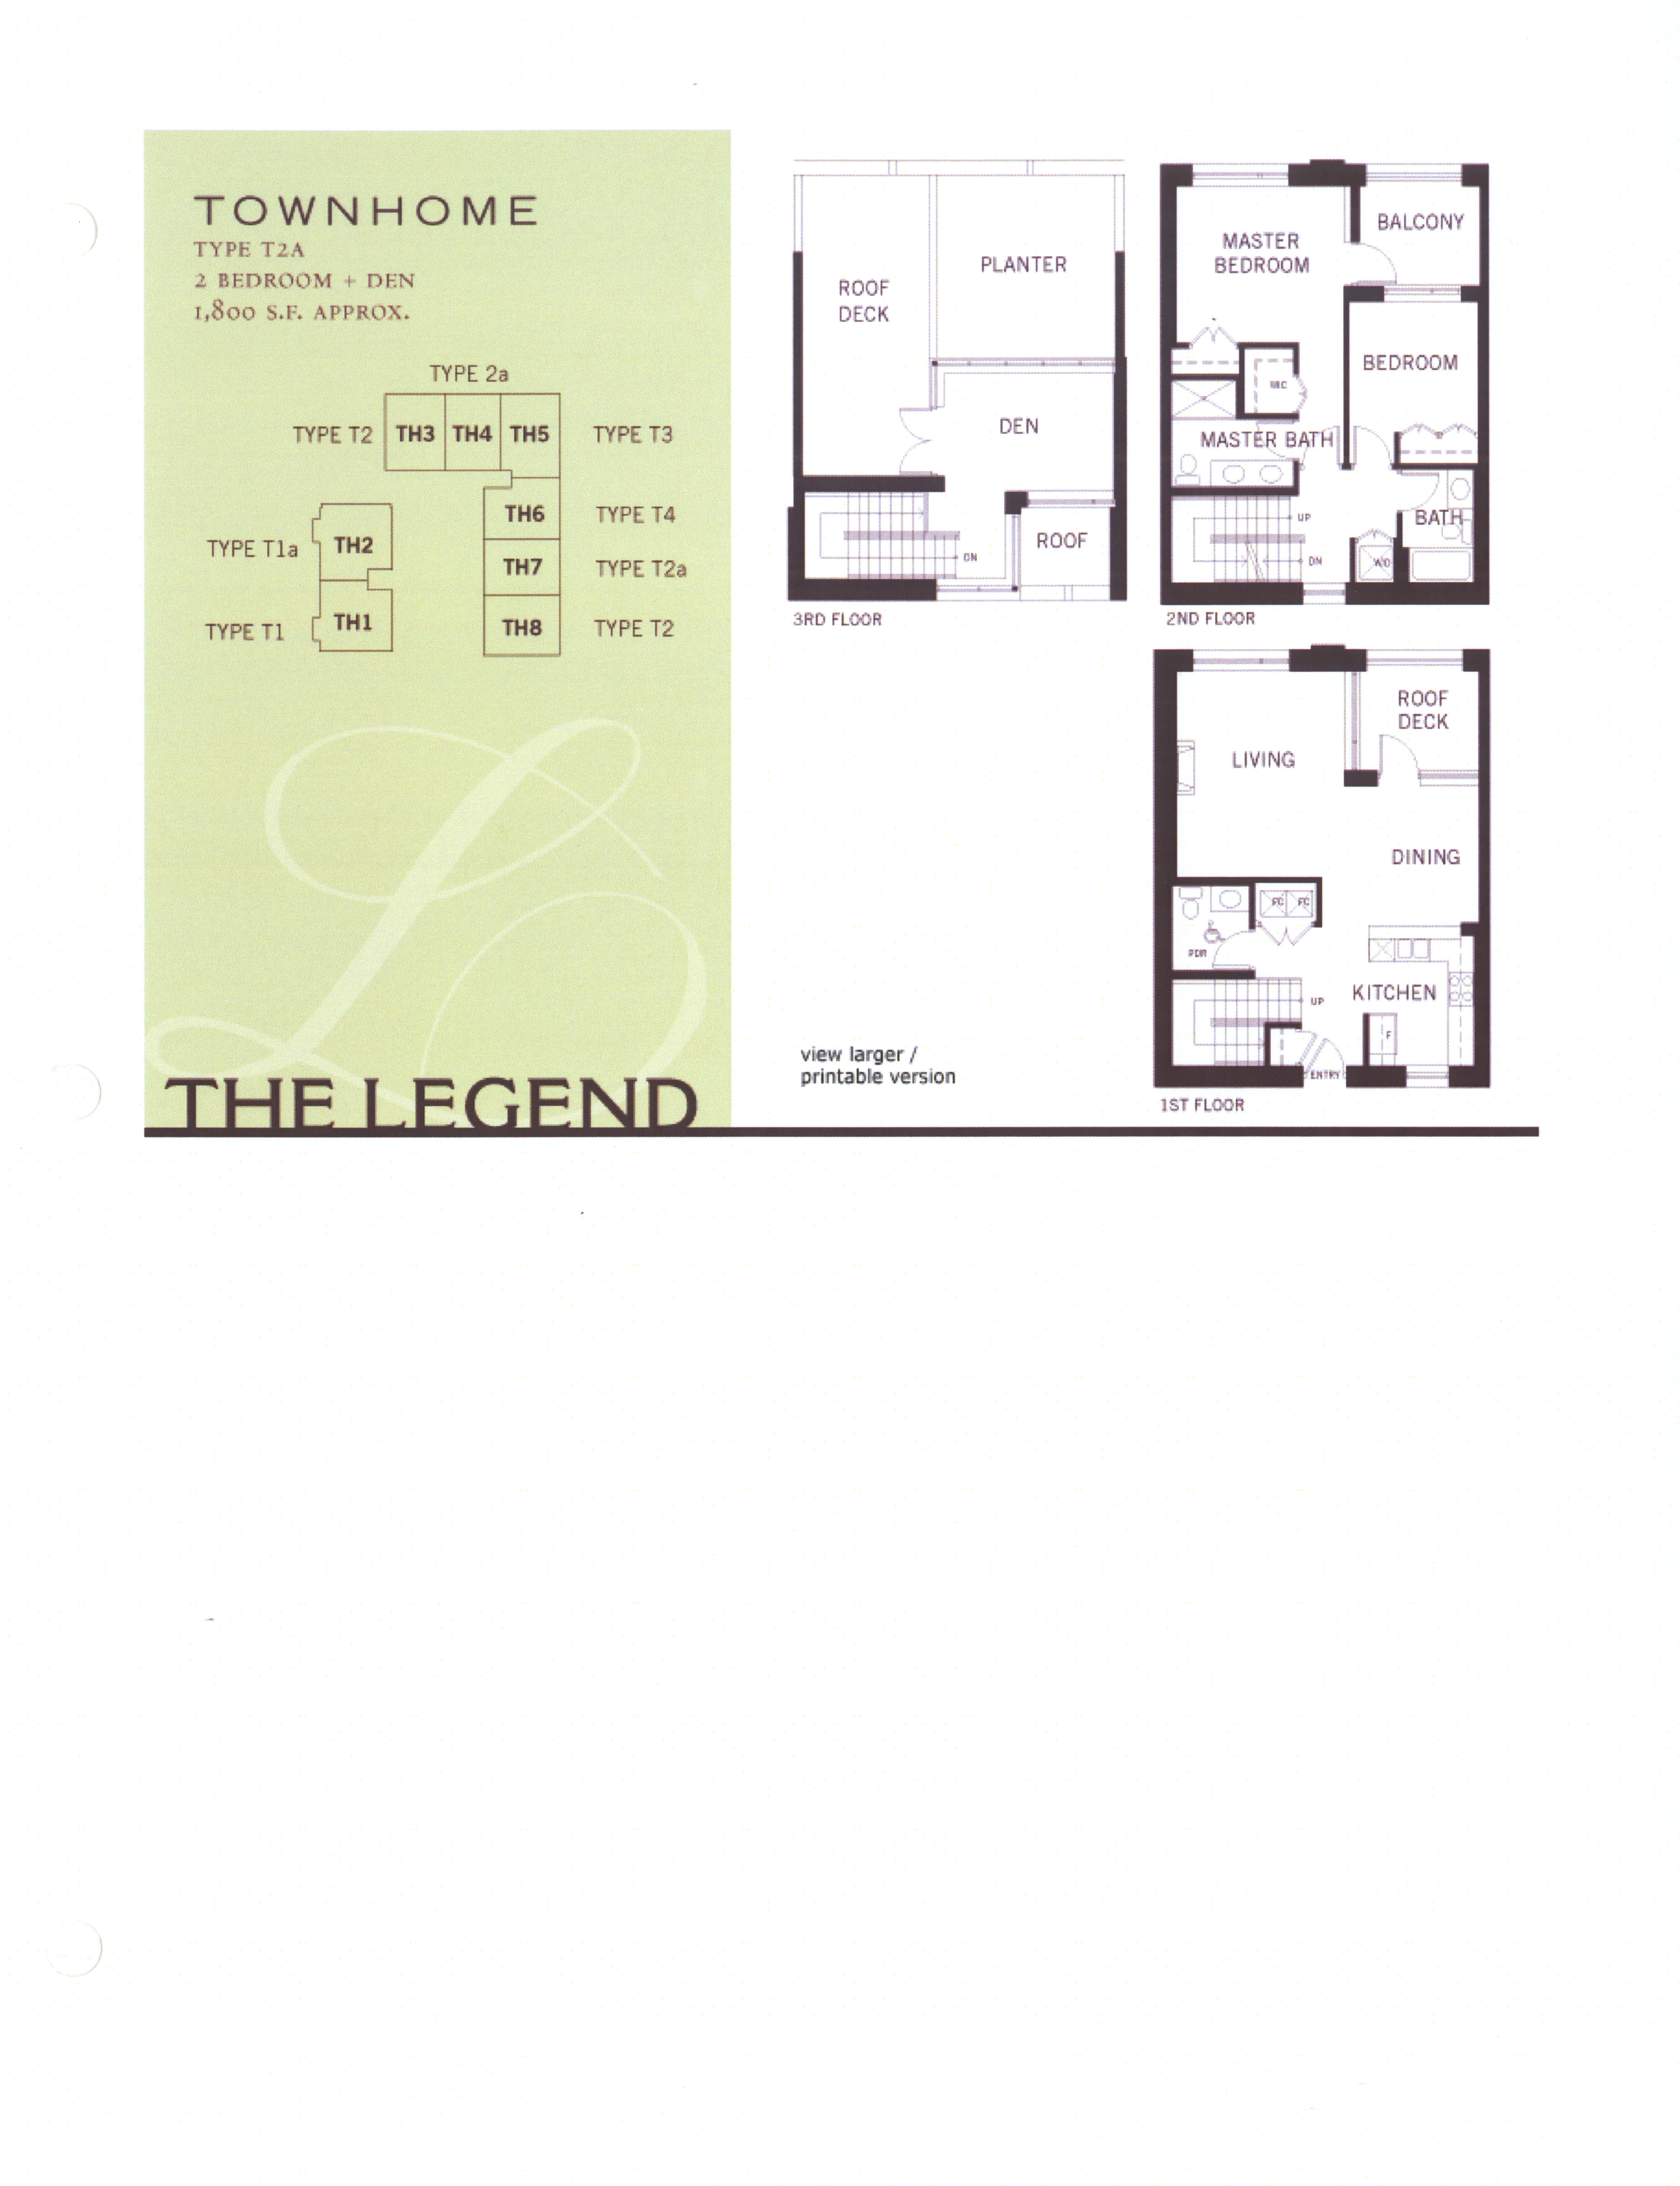 The Legend Floor Plan Townhome Type T2A The Legend